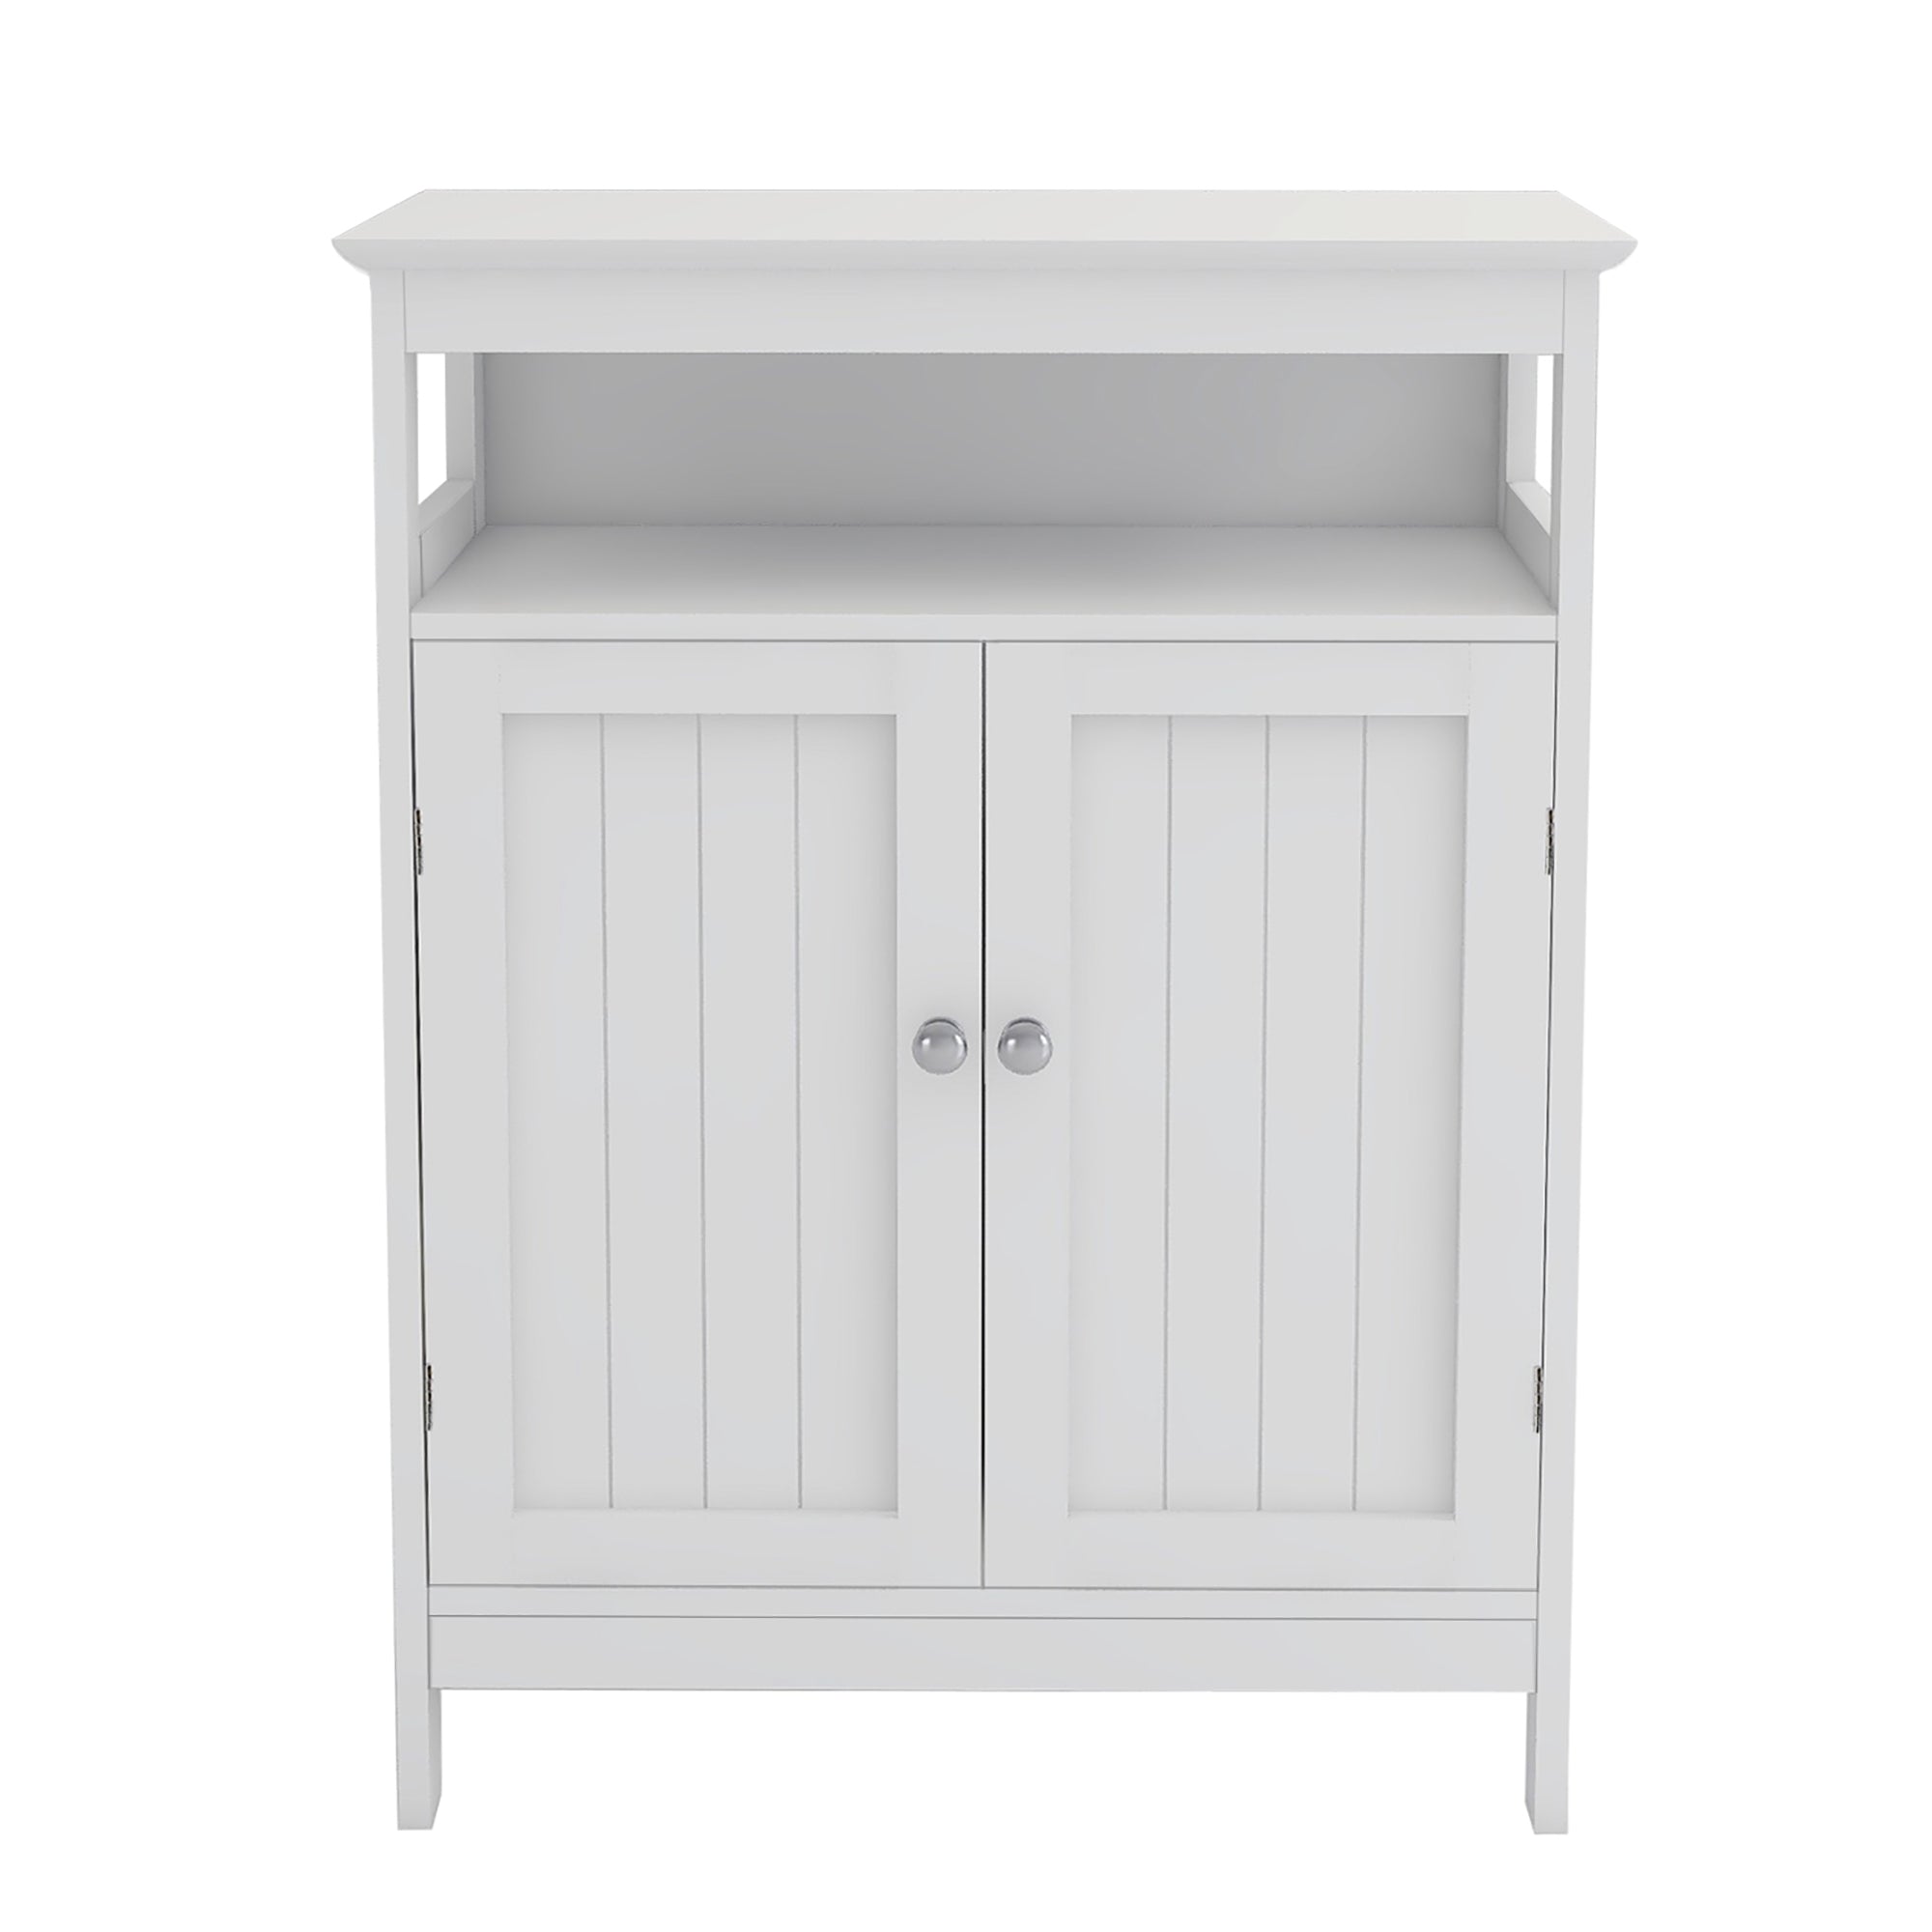 Bathroom Standing Storage with Double Shutter Doors Cabinet - White